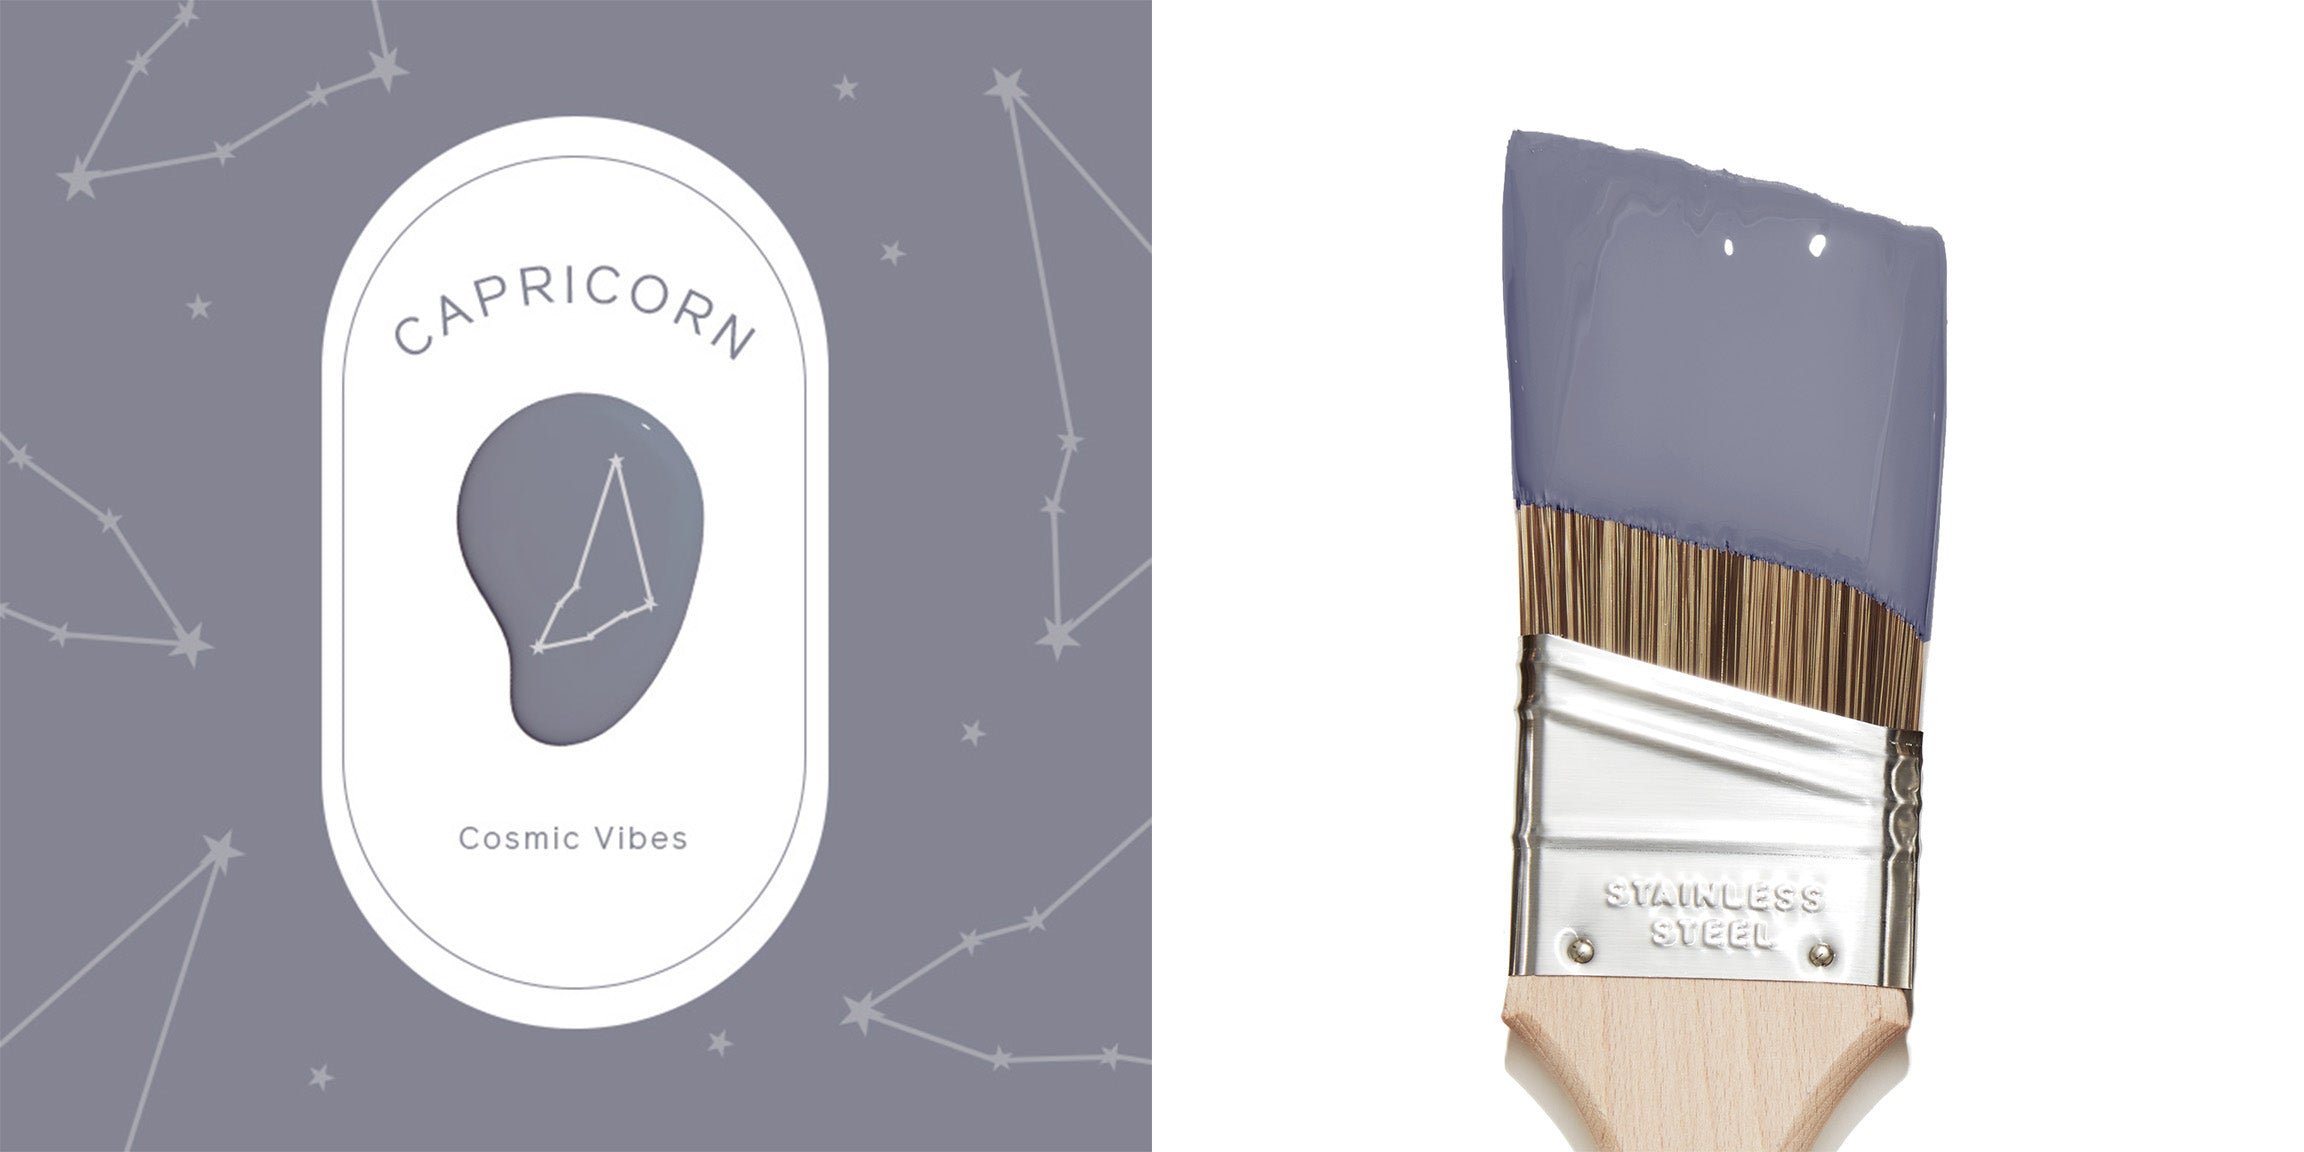 Get your 2023 horoscope and find the perfect paint colors for your zodiac. For Capricorn, it’s Cosmic Vibes — a dusty purple paint color from Clare.